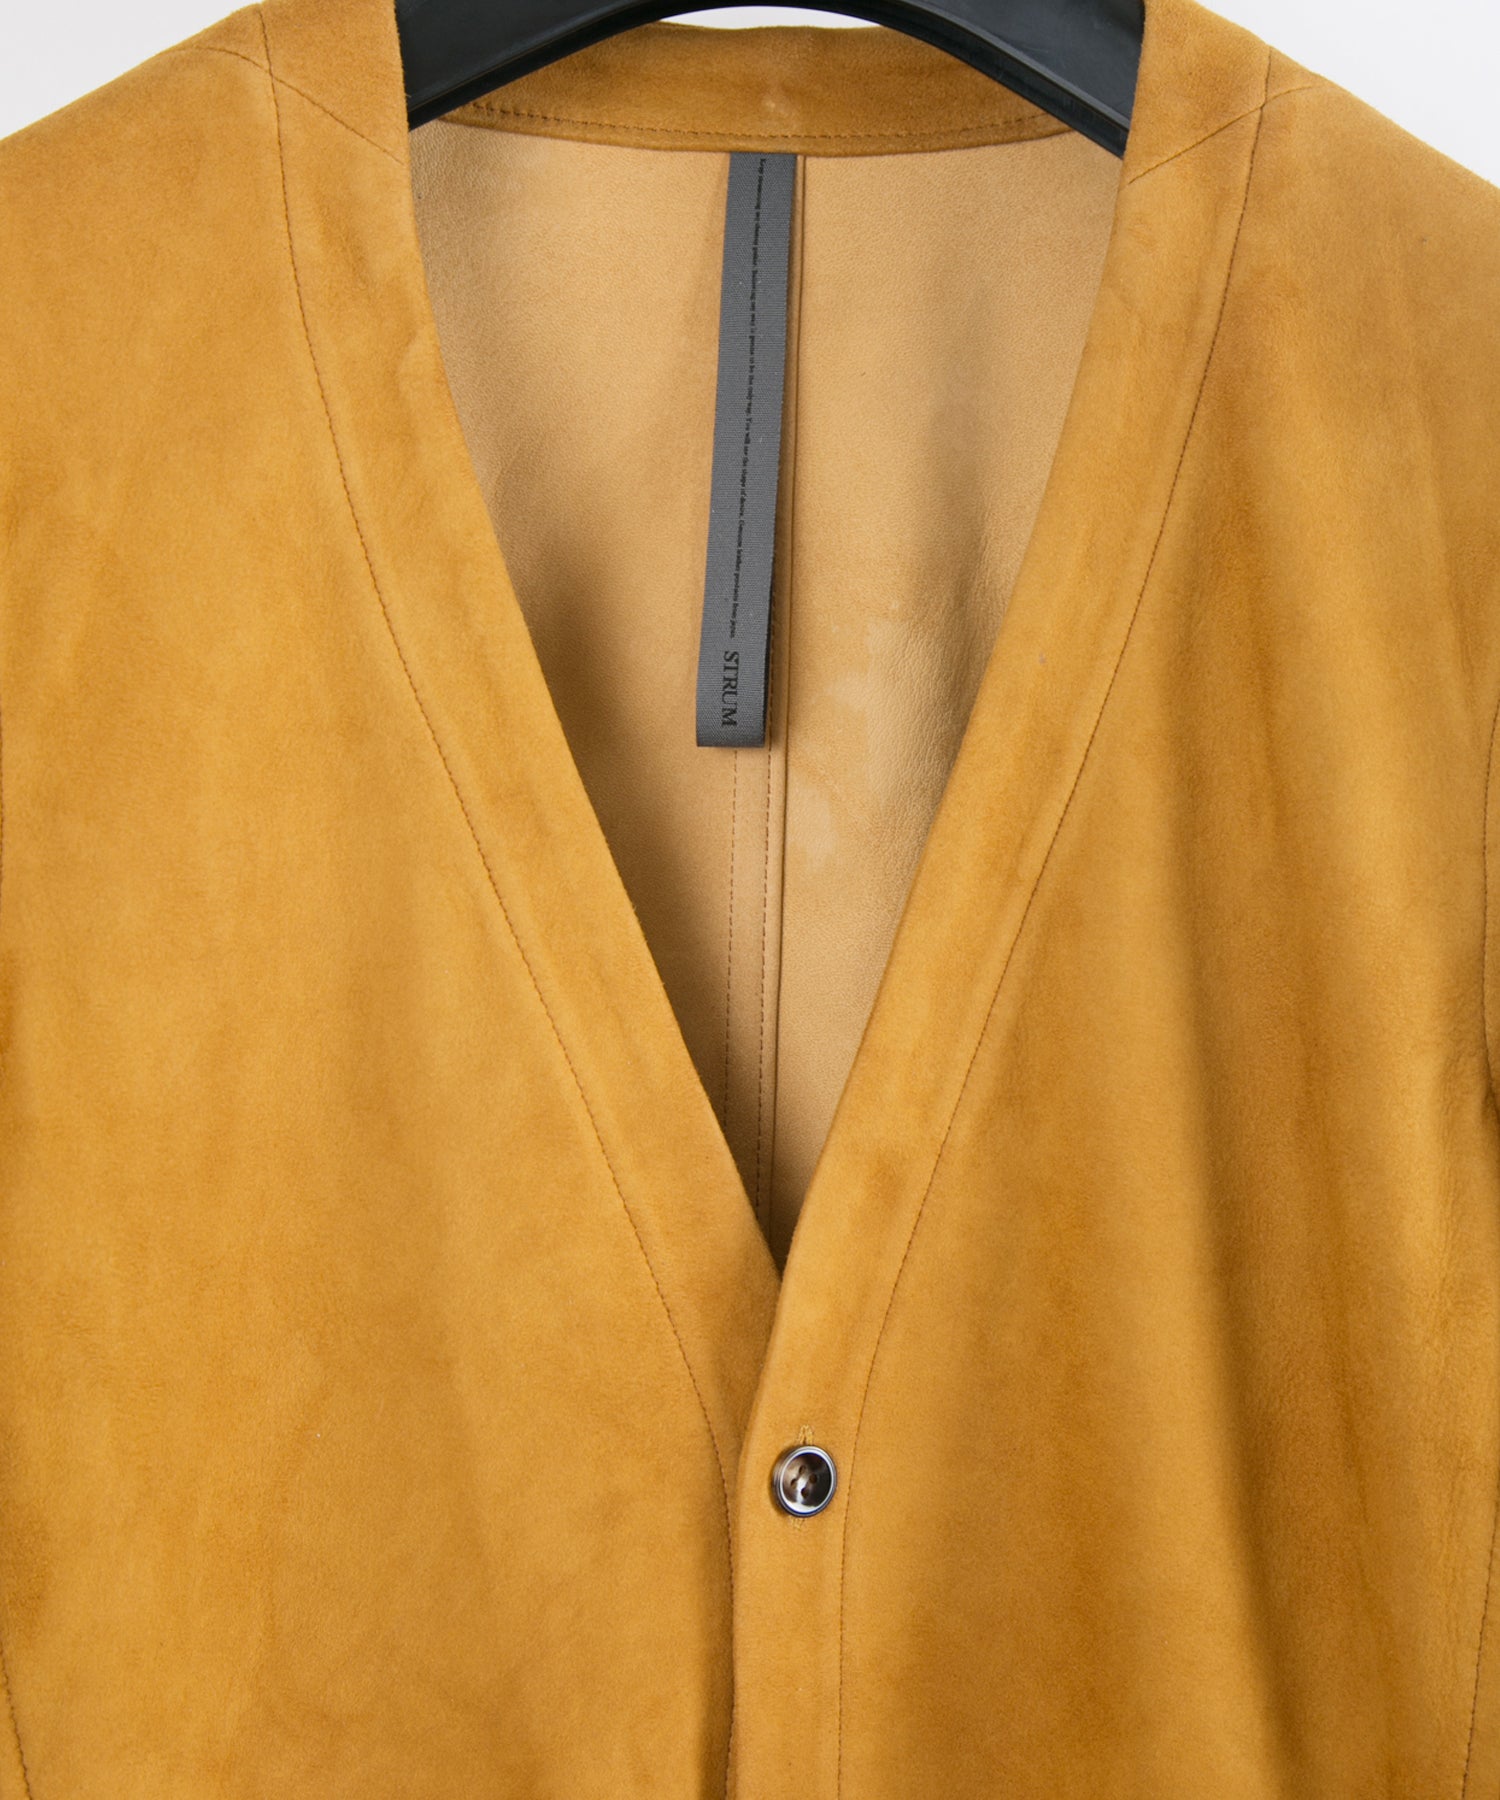 Load image into Gallery viewer, Highland Lamb Silky Suede Leather Coat / Camel